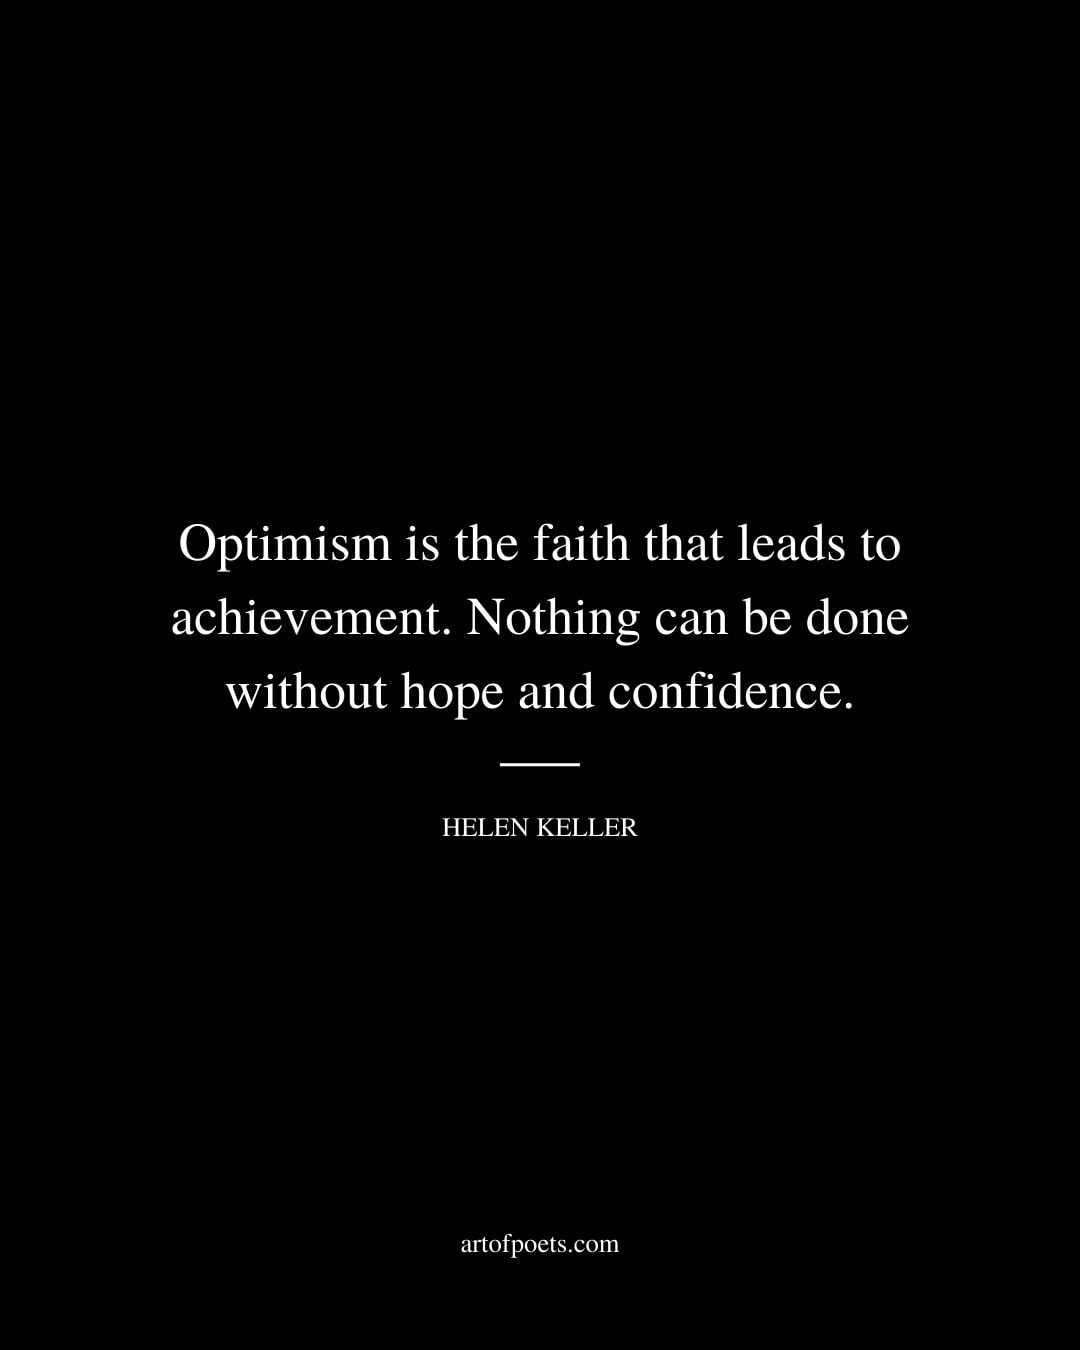 Optimism is the faith that leads to achievement. Nothing can be done without hope and confidence. – Helen Keller